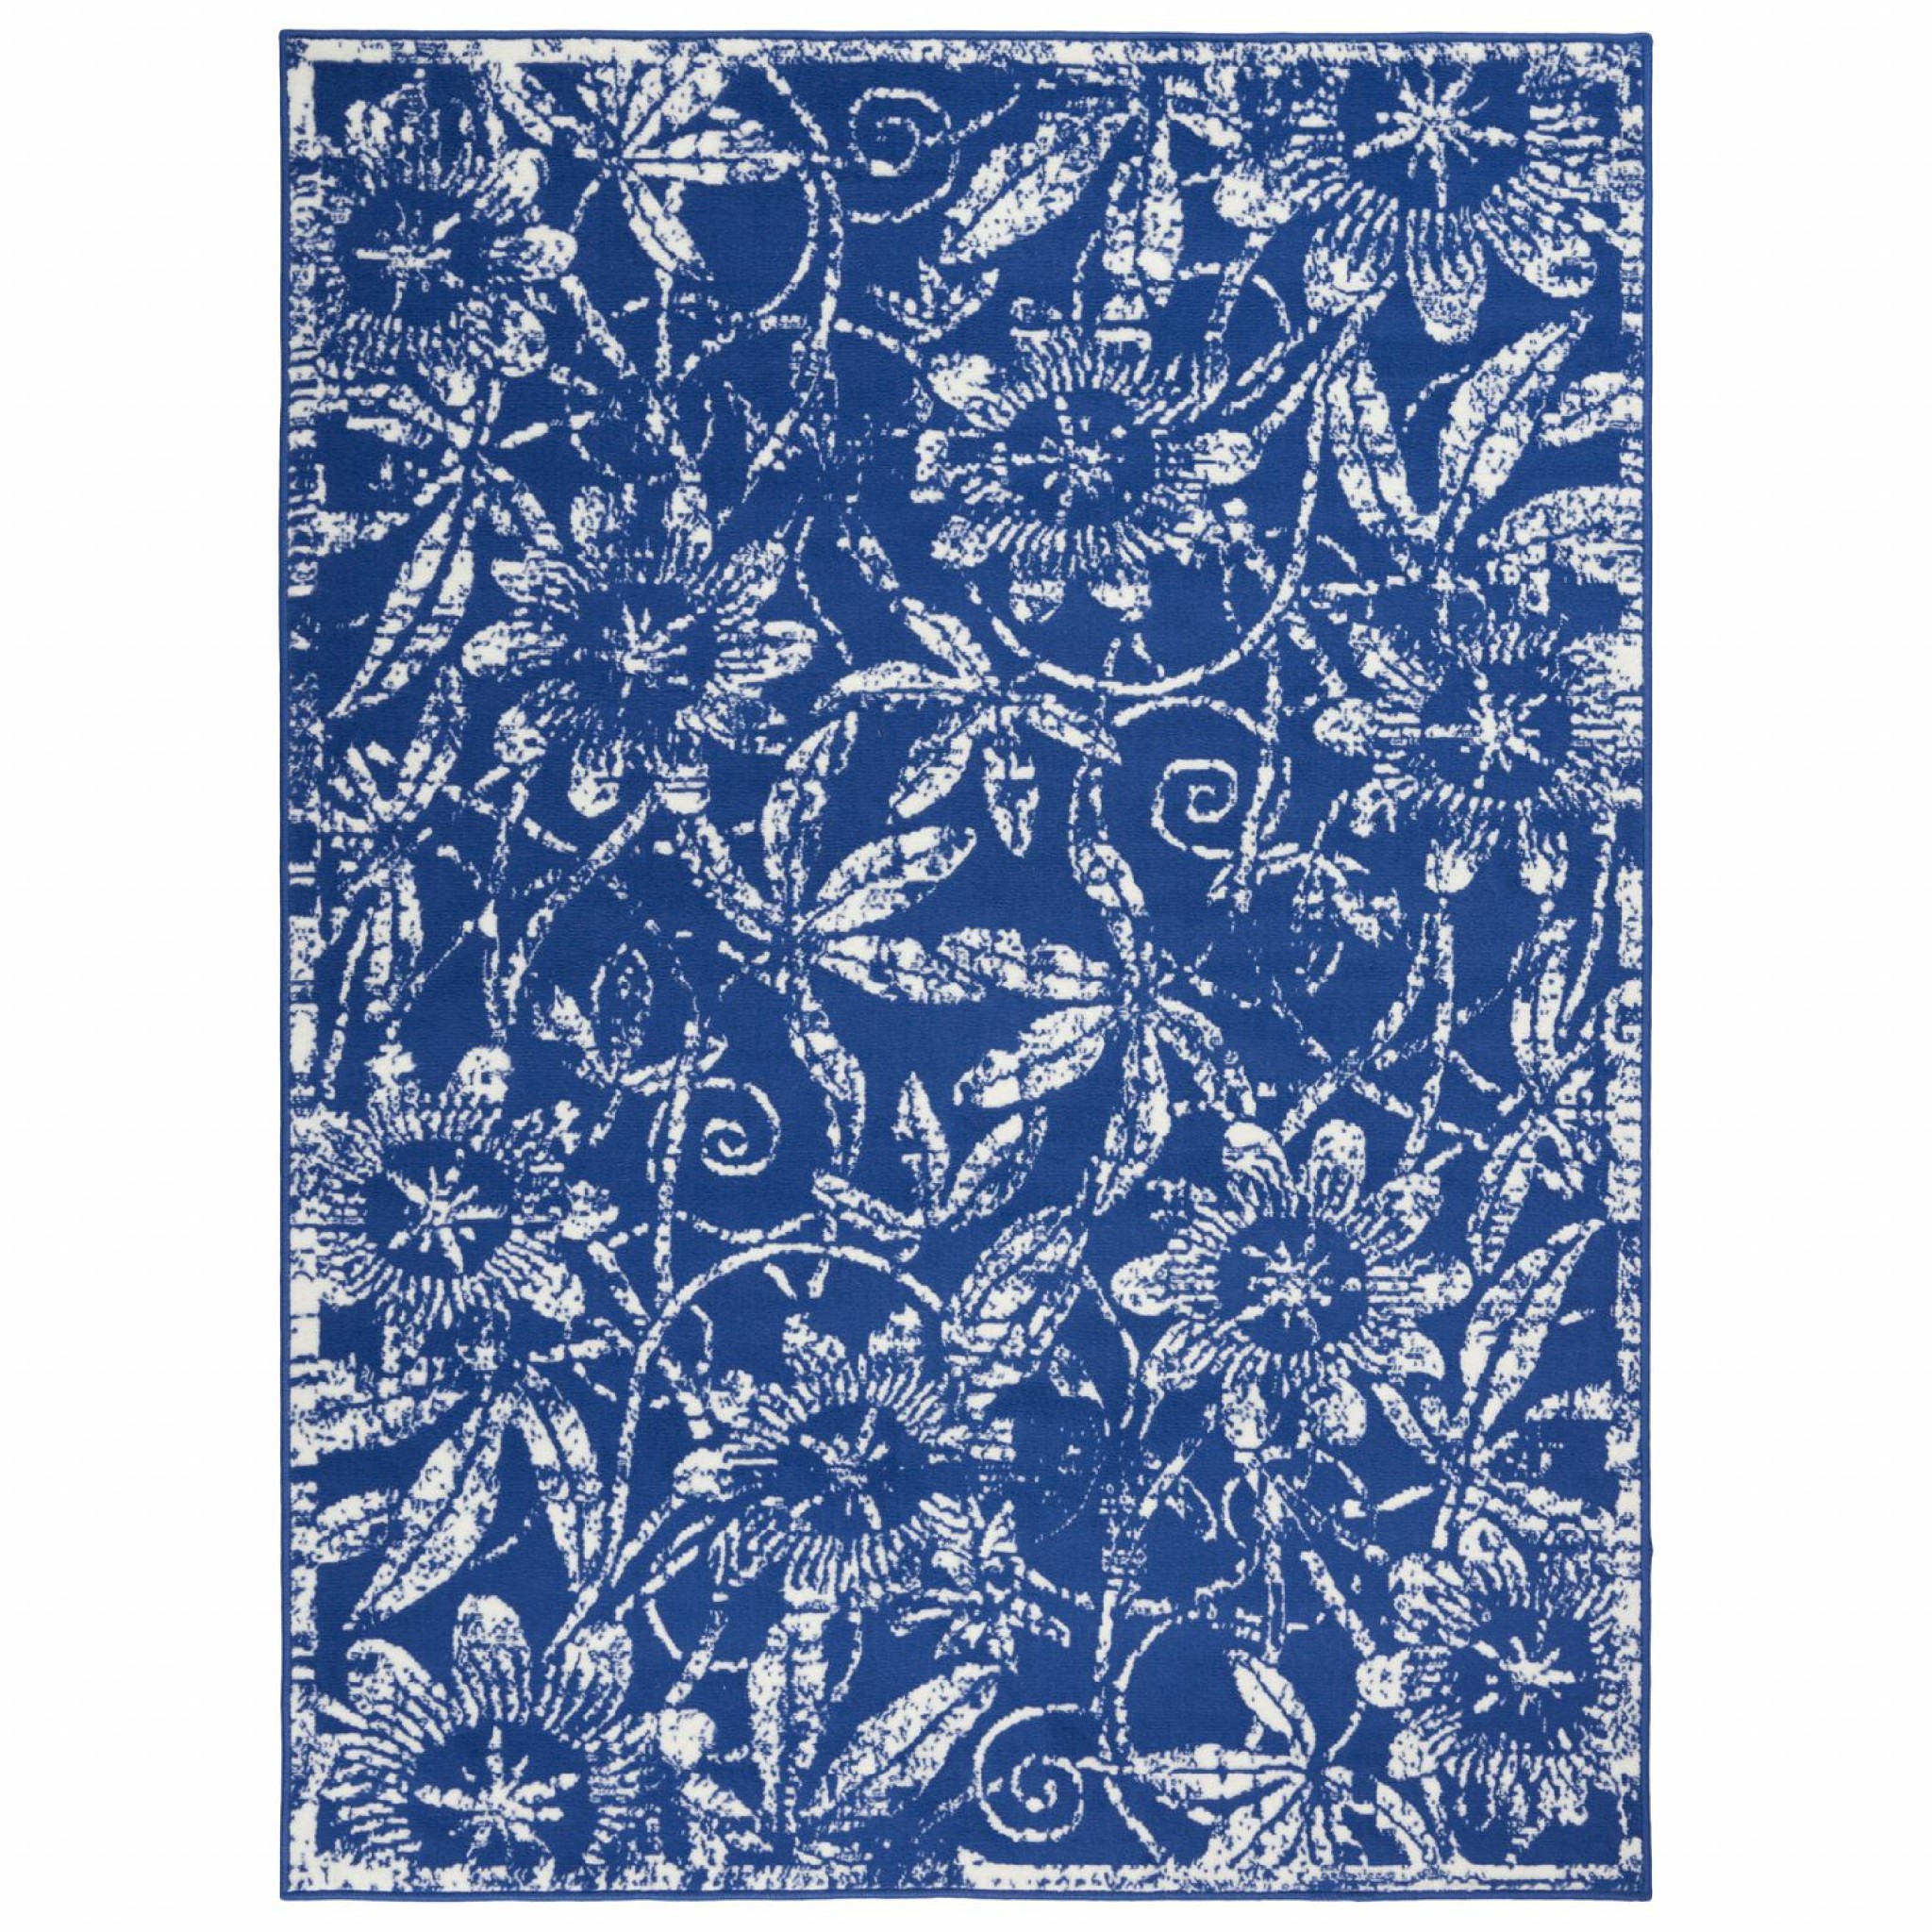 6' X 9' Navy Blue Floral Dhurrie Area Rug-385849-1